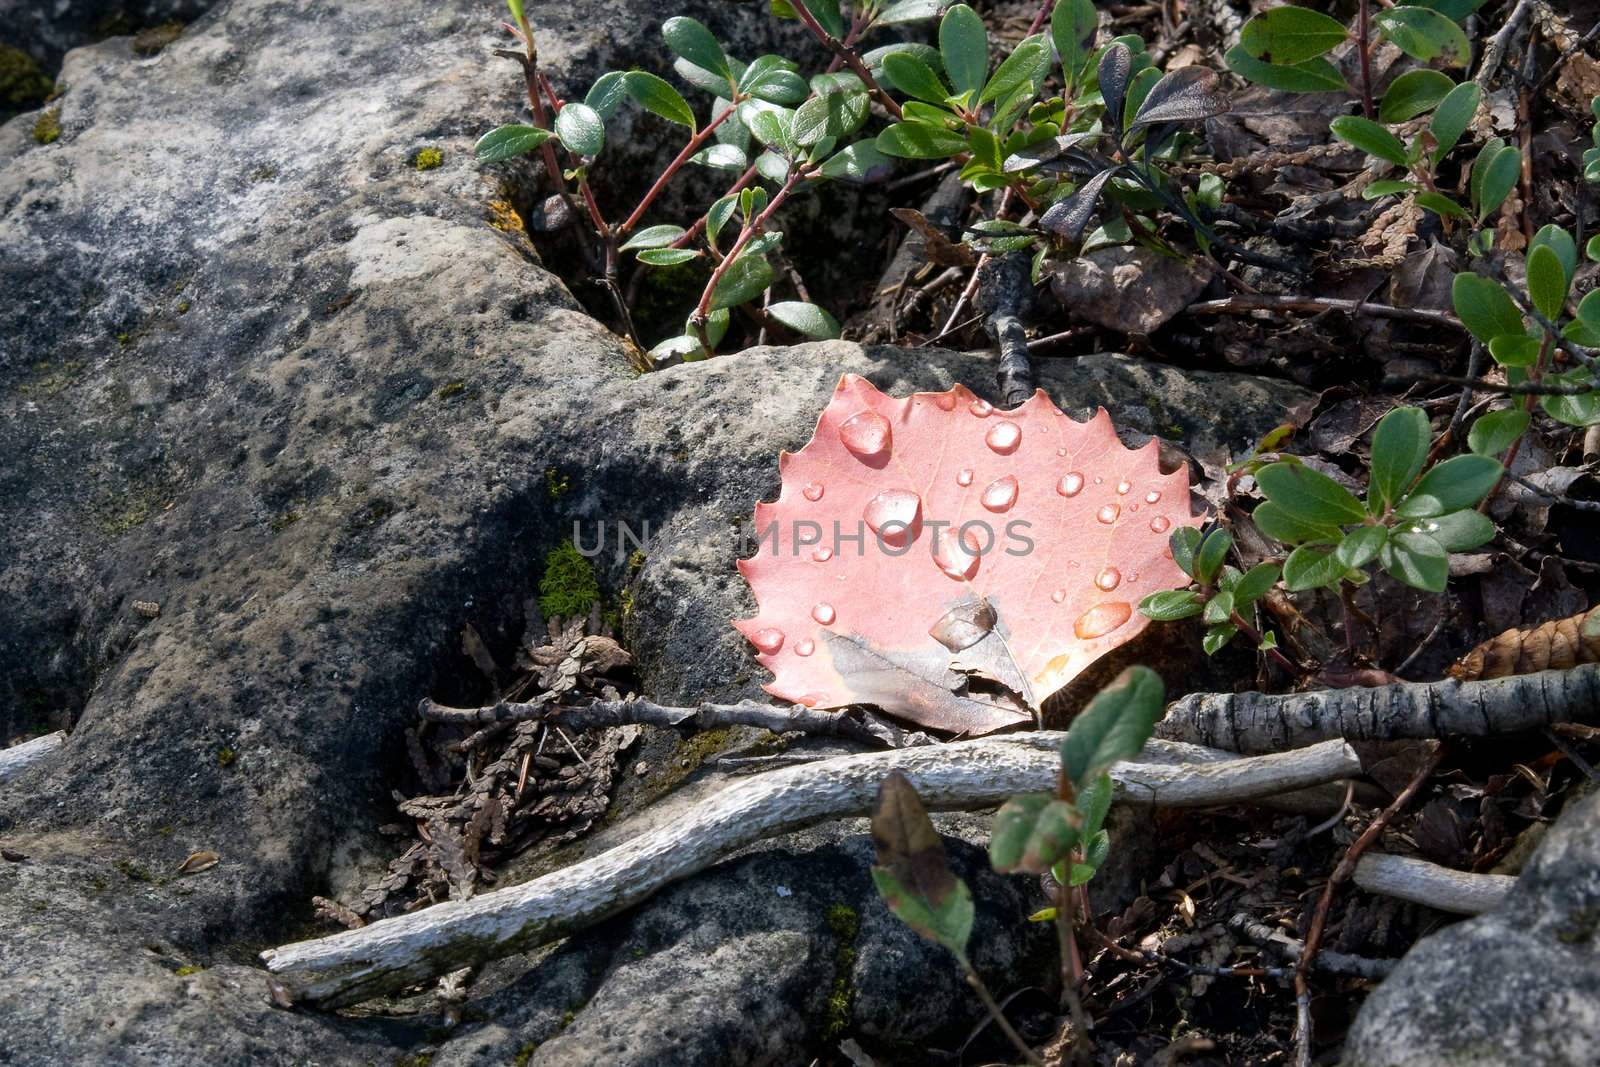 A single red leaf with water droplets, situated on rock.